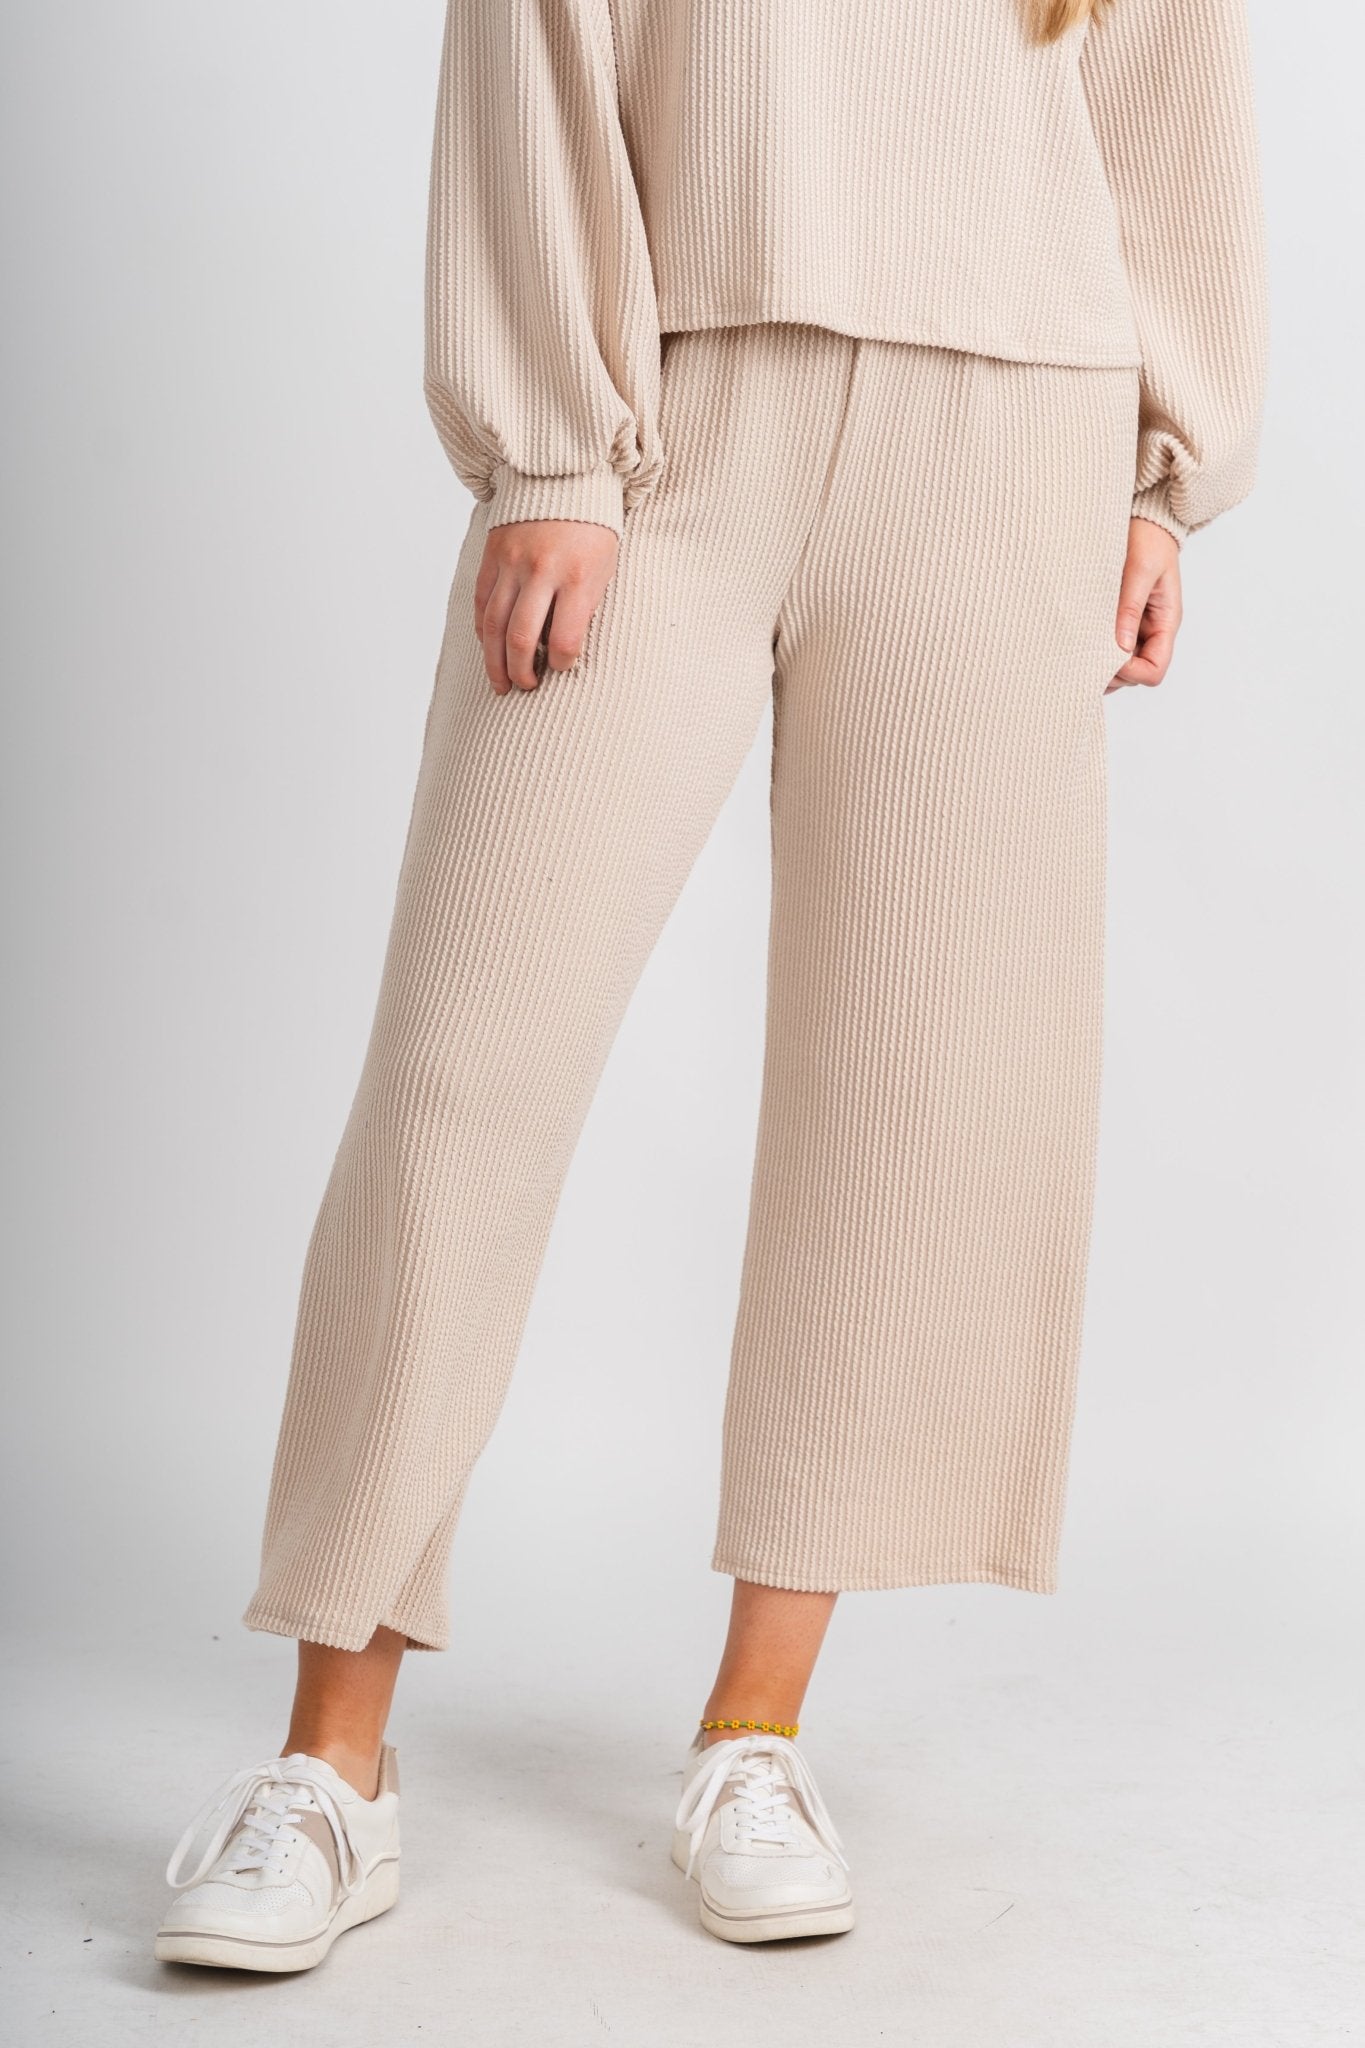 Manifest ribbed pants taupe - Cute Pants - Fun Cozy Basics at Lush Fashion Lounge Boutique in Oklahoma City